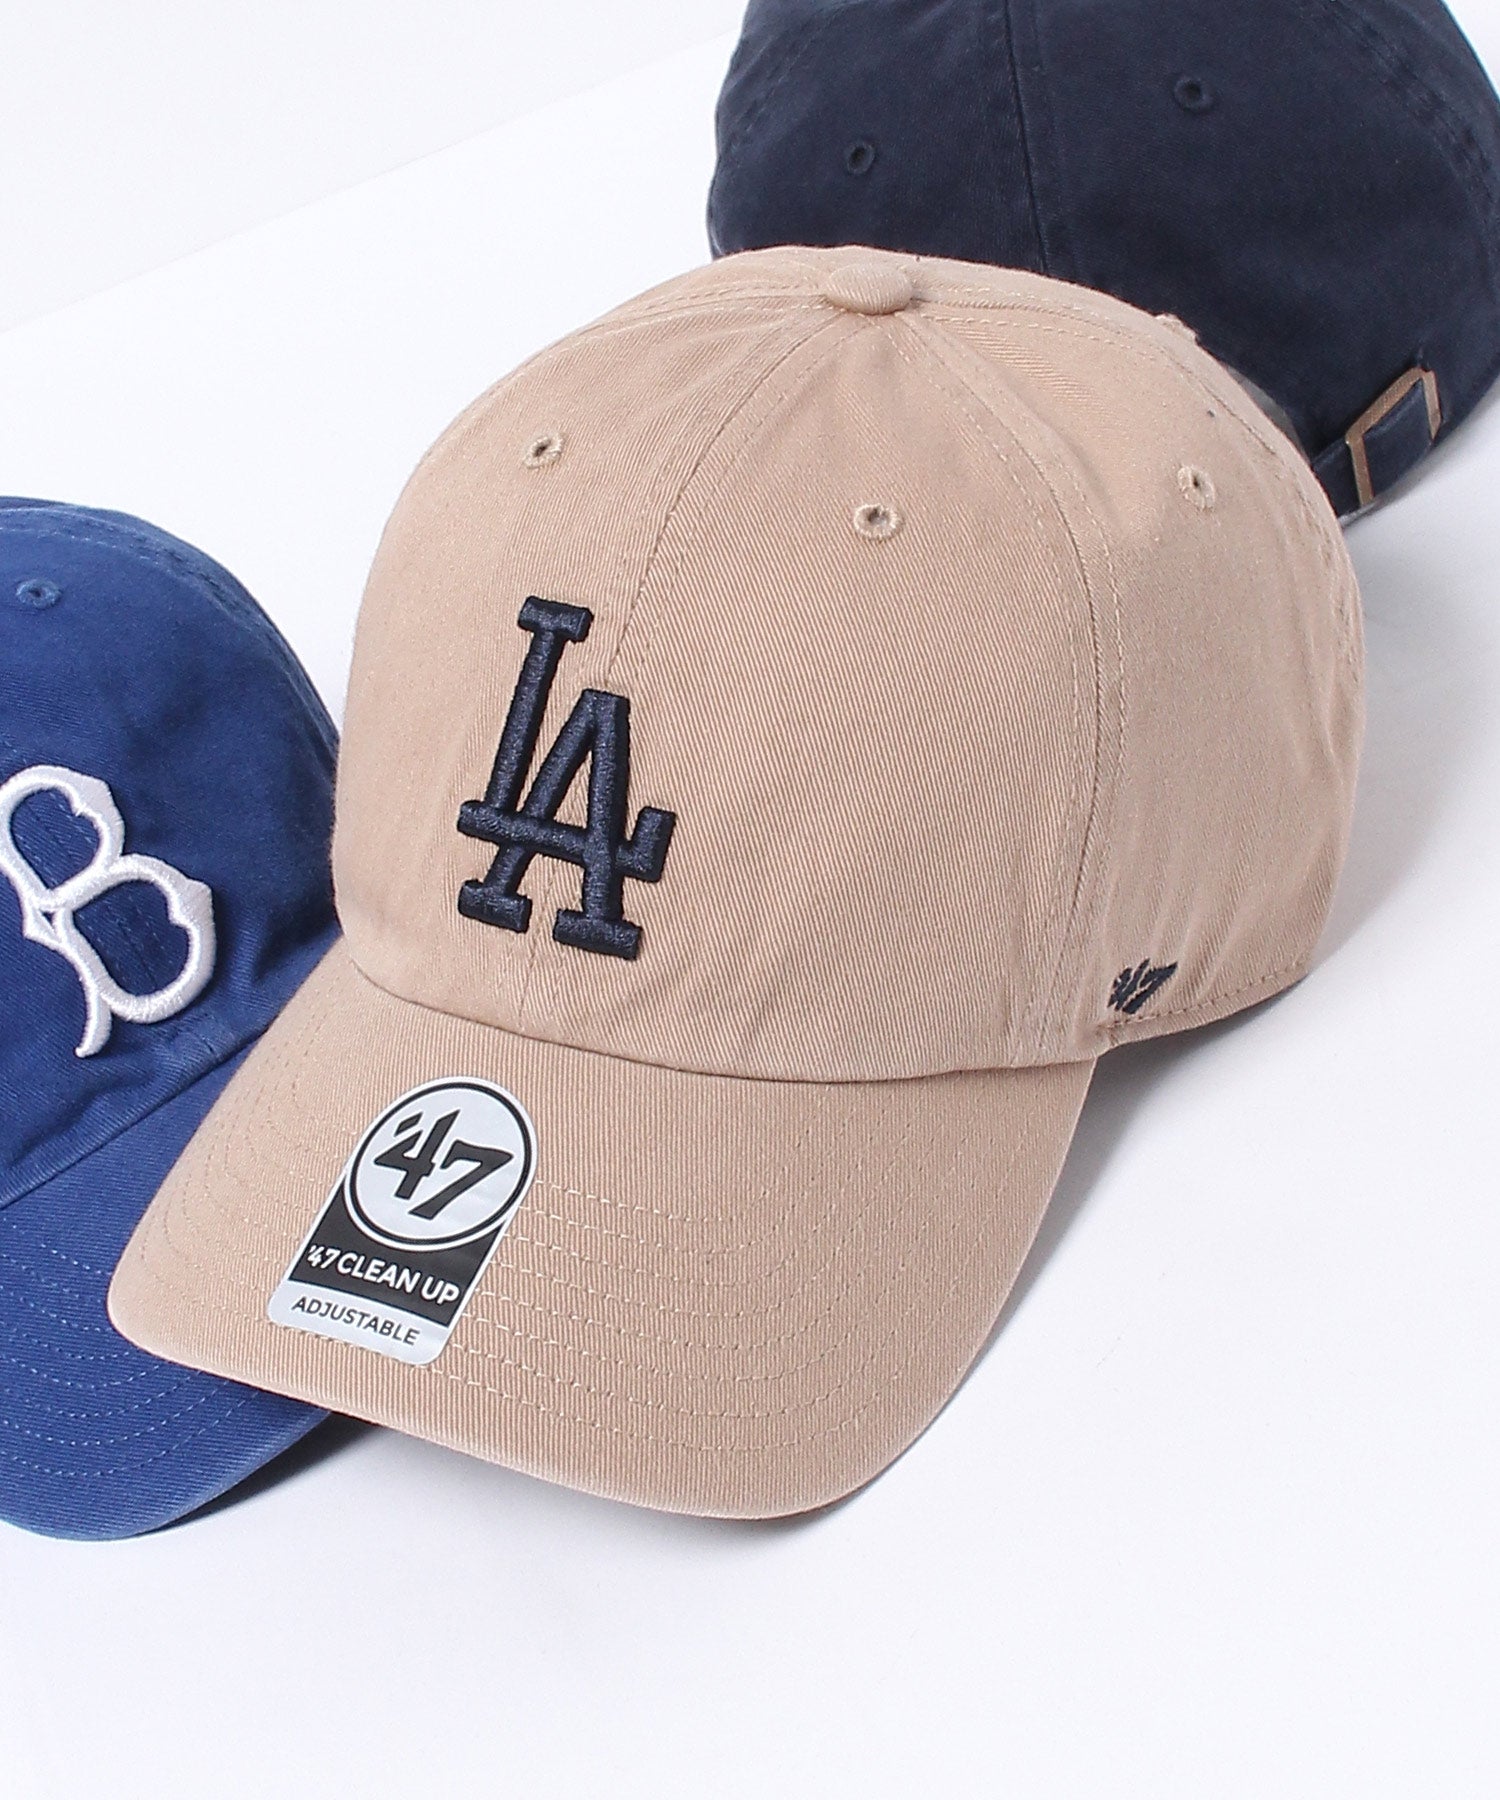 Dodgers '47 CLEAN UP / ドジャース クリーンナップ キャップ – NAVAL 